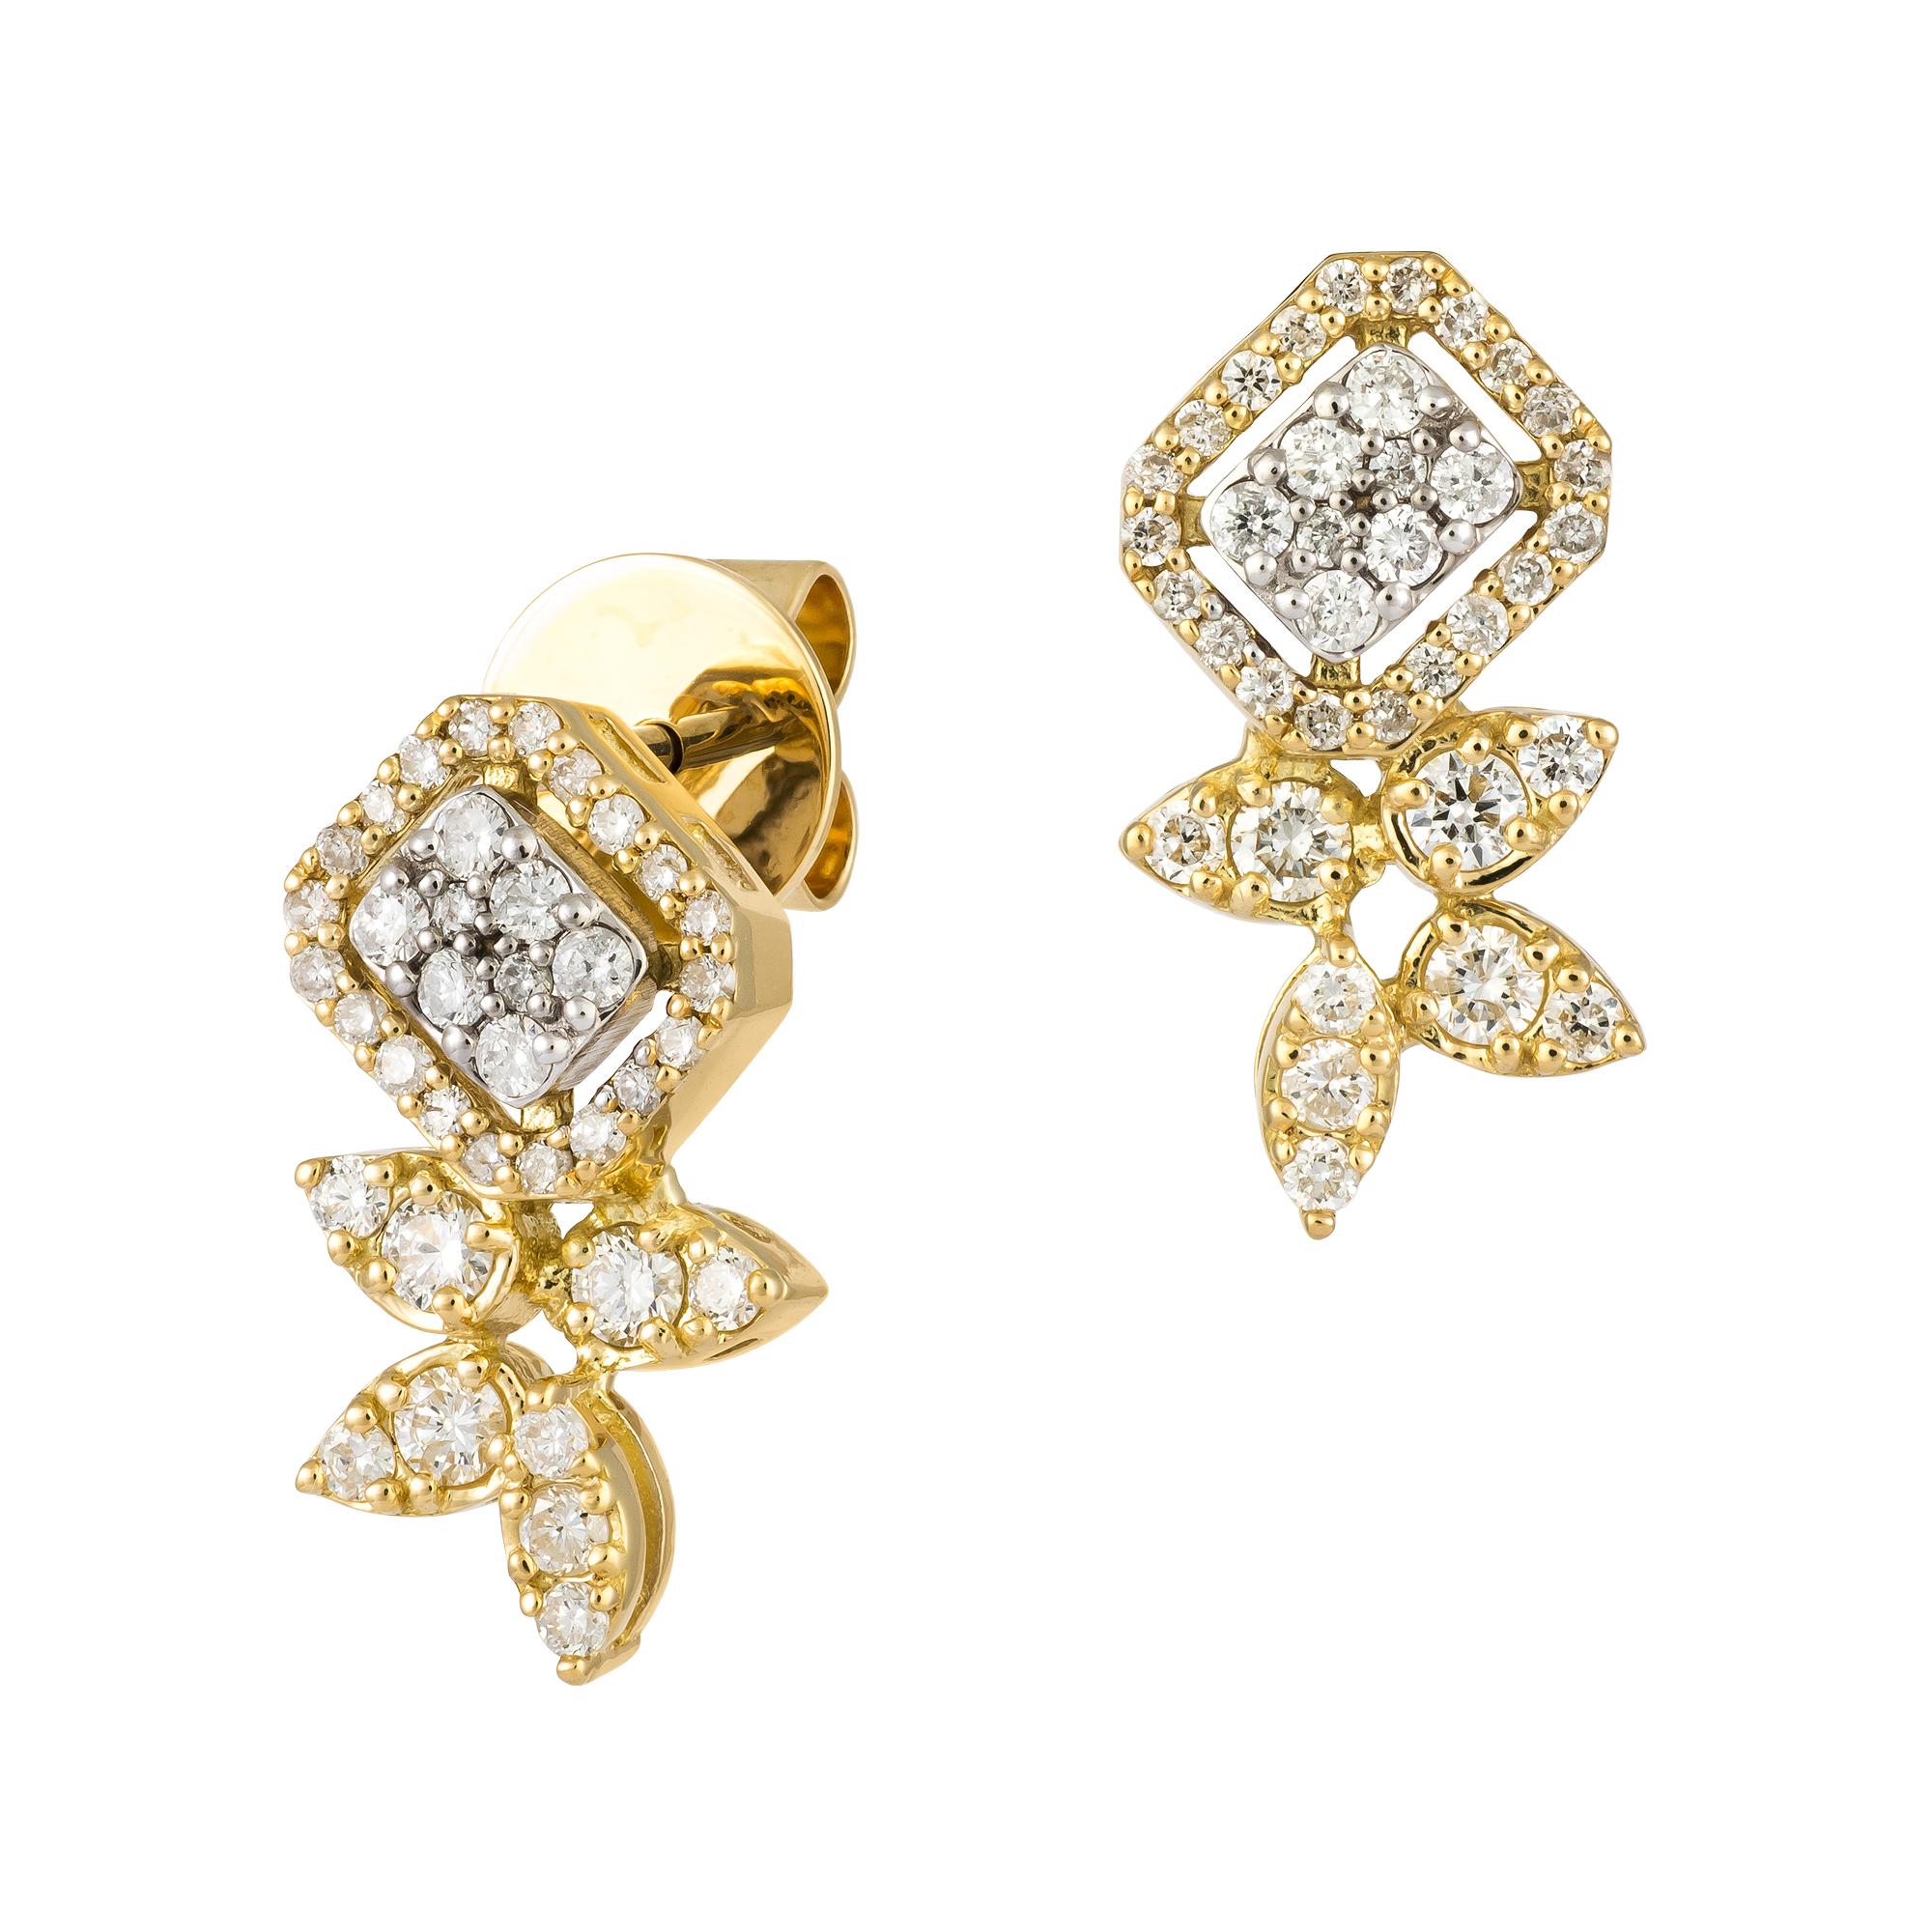 Modern Every Day White Yellow Gold 18K Earrings Diamond For Her For Sale